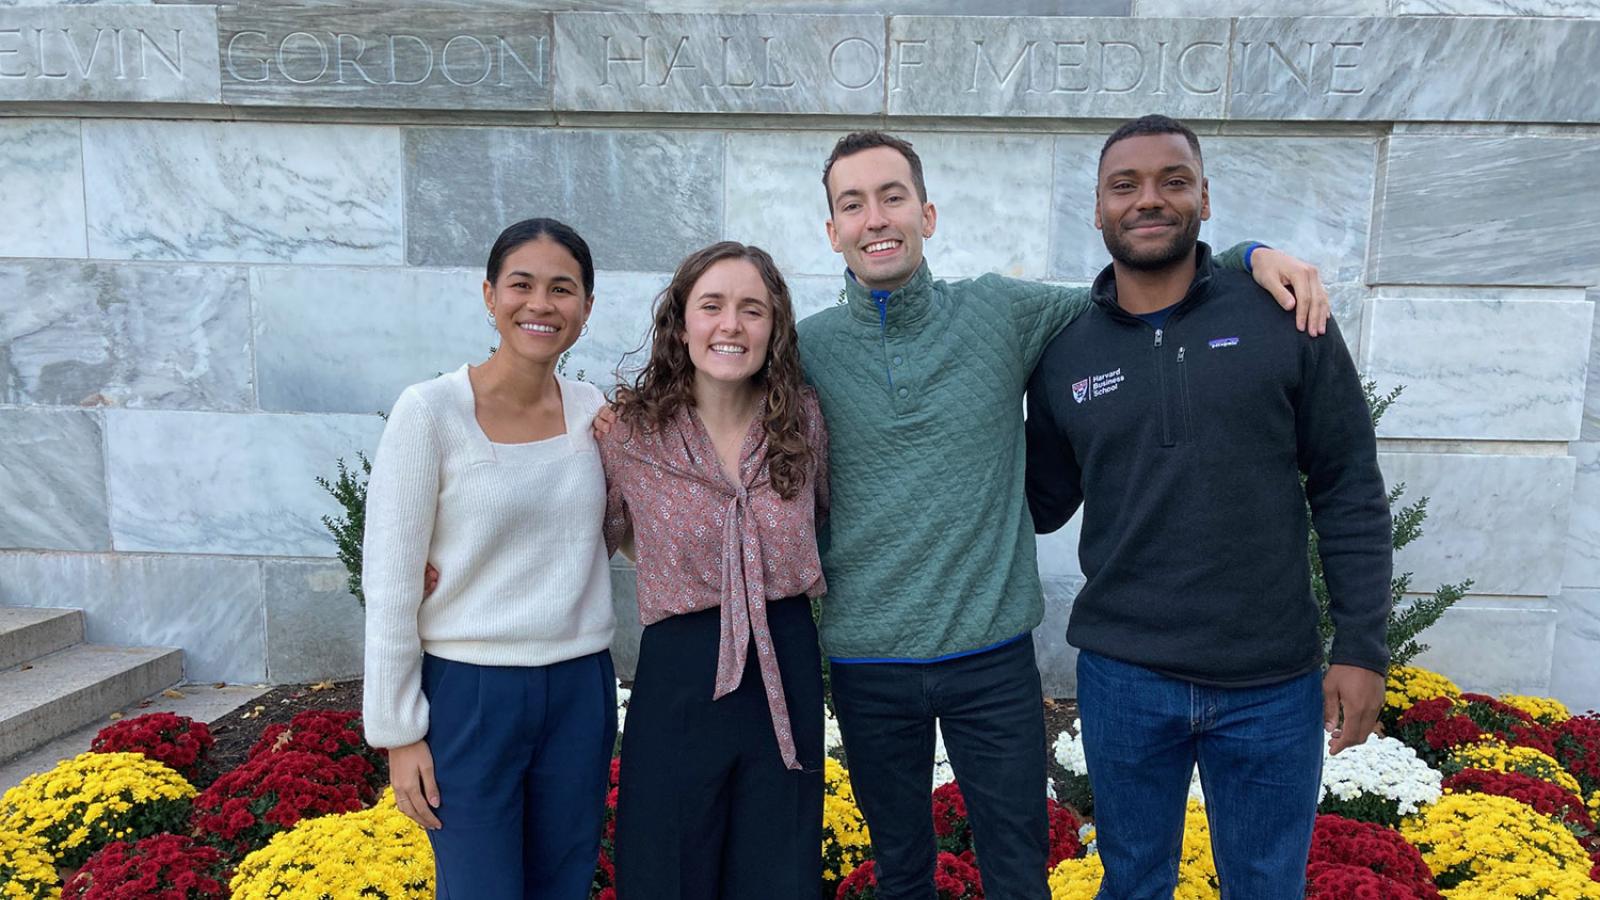 Julia Foote '18, Samantha Little '20, Sal Daddario '18 and Aseal Birir '18 at Harvard Medical School outdoors with flowers in background